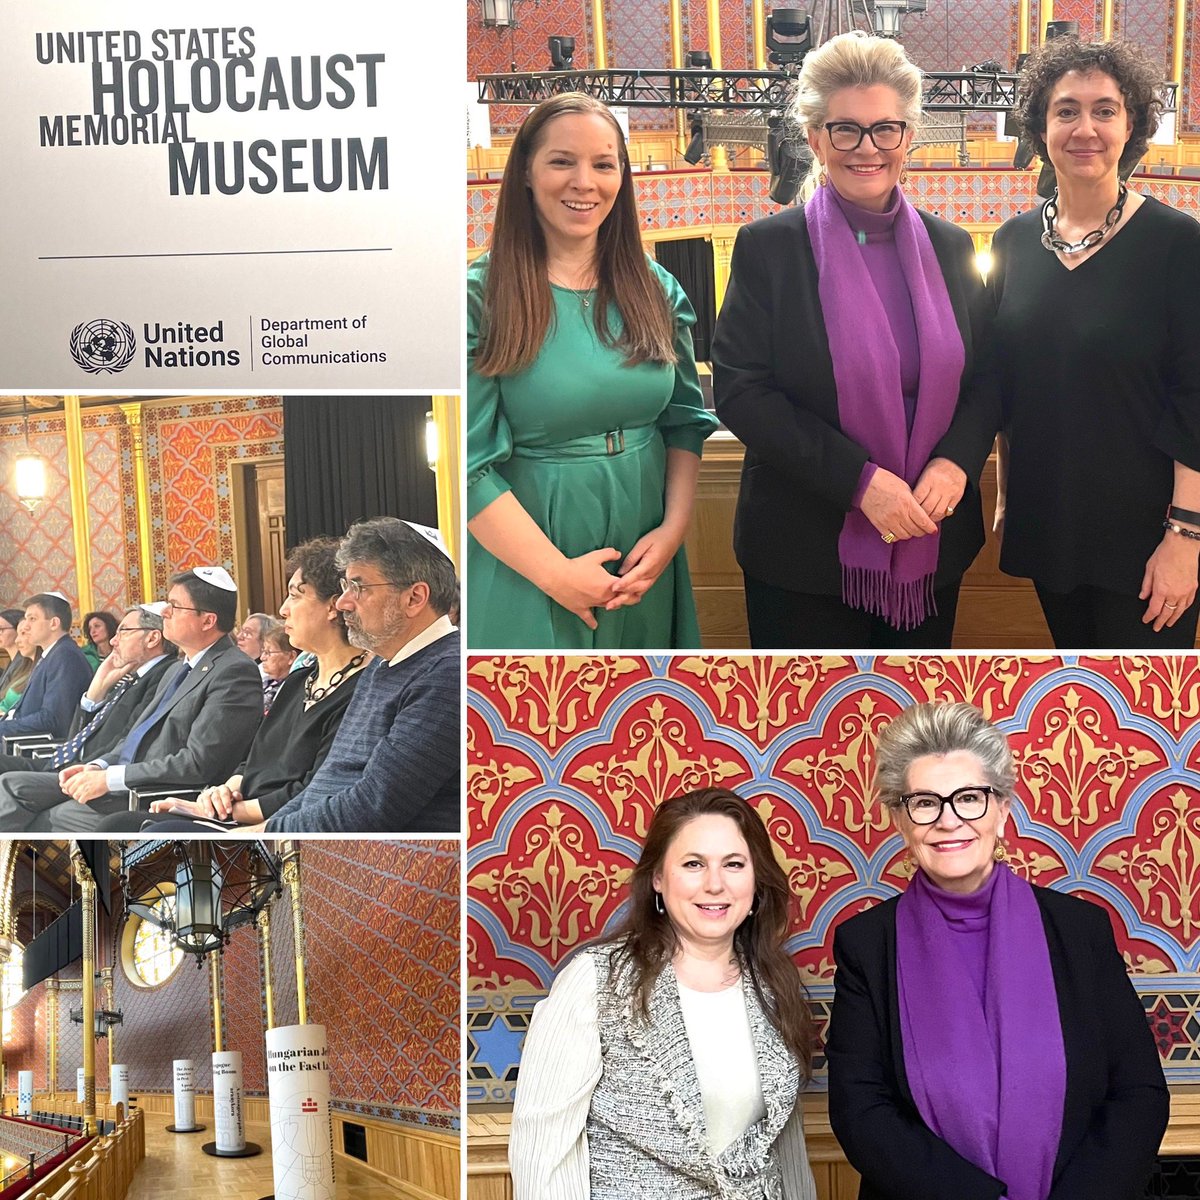 ‘They Were Our Neighbours’ … a new exhibition was opened at Rumbach Sebestyen Synagogue by Washington @HolocaustMuseum and @unitednationsvienna for Pesachfest @Mazsihisz as part of Holocaust’80 memorial year. W/ @GMJuditPolgar #aleishafishman #vadlovojudit #Diplomacy